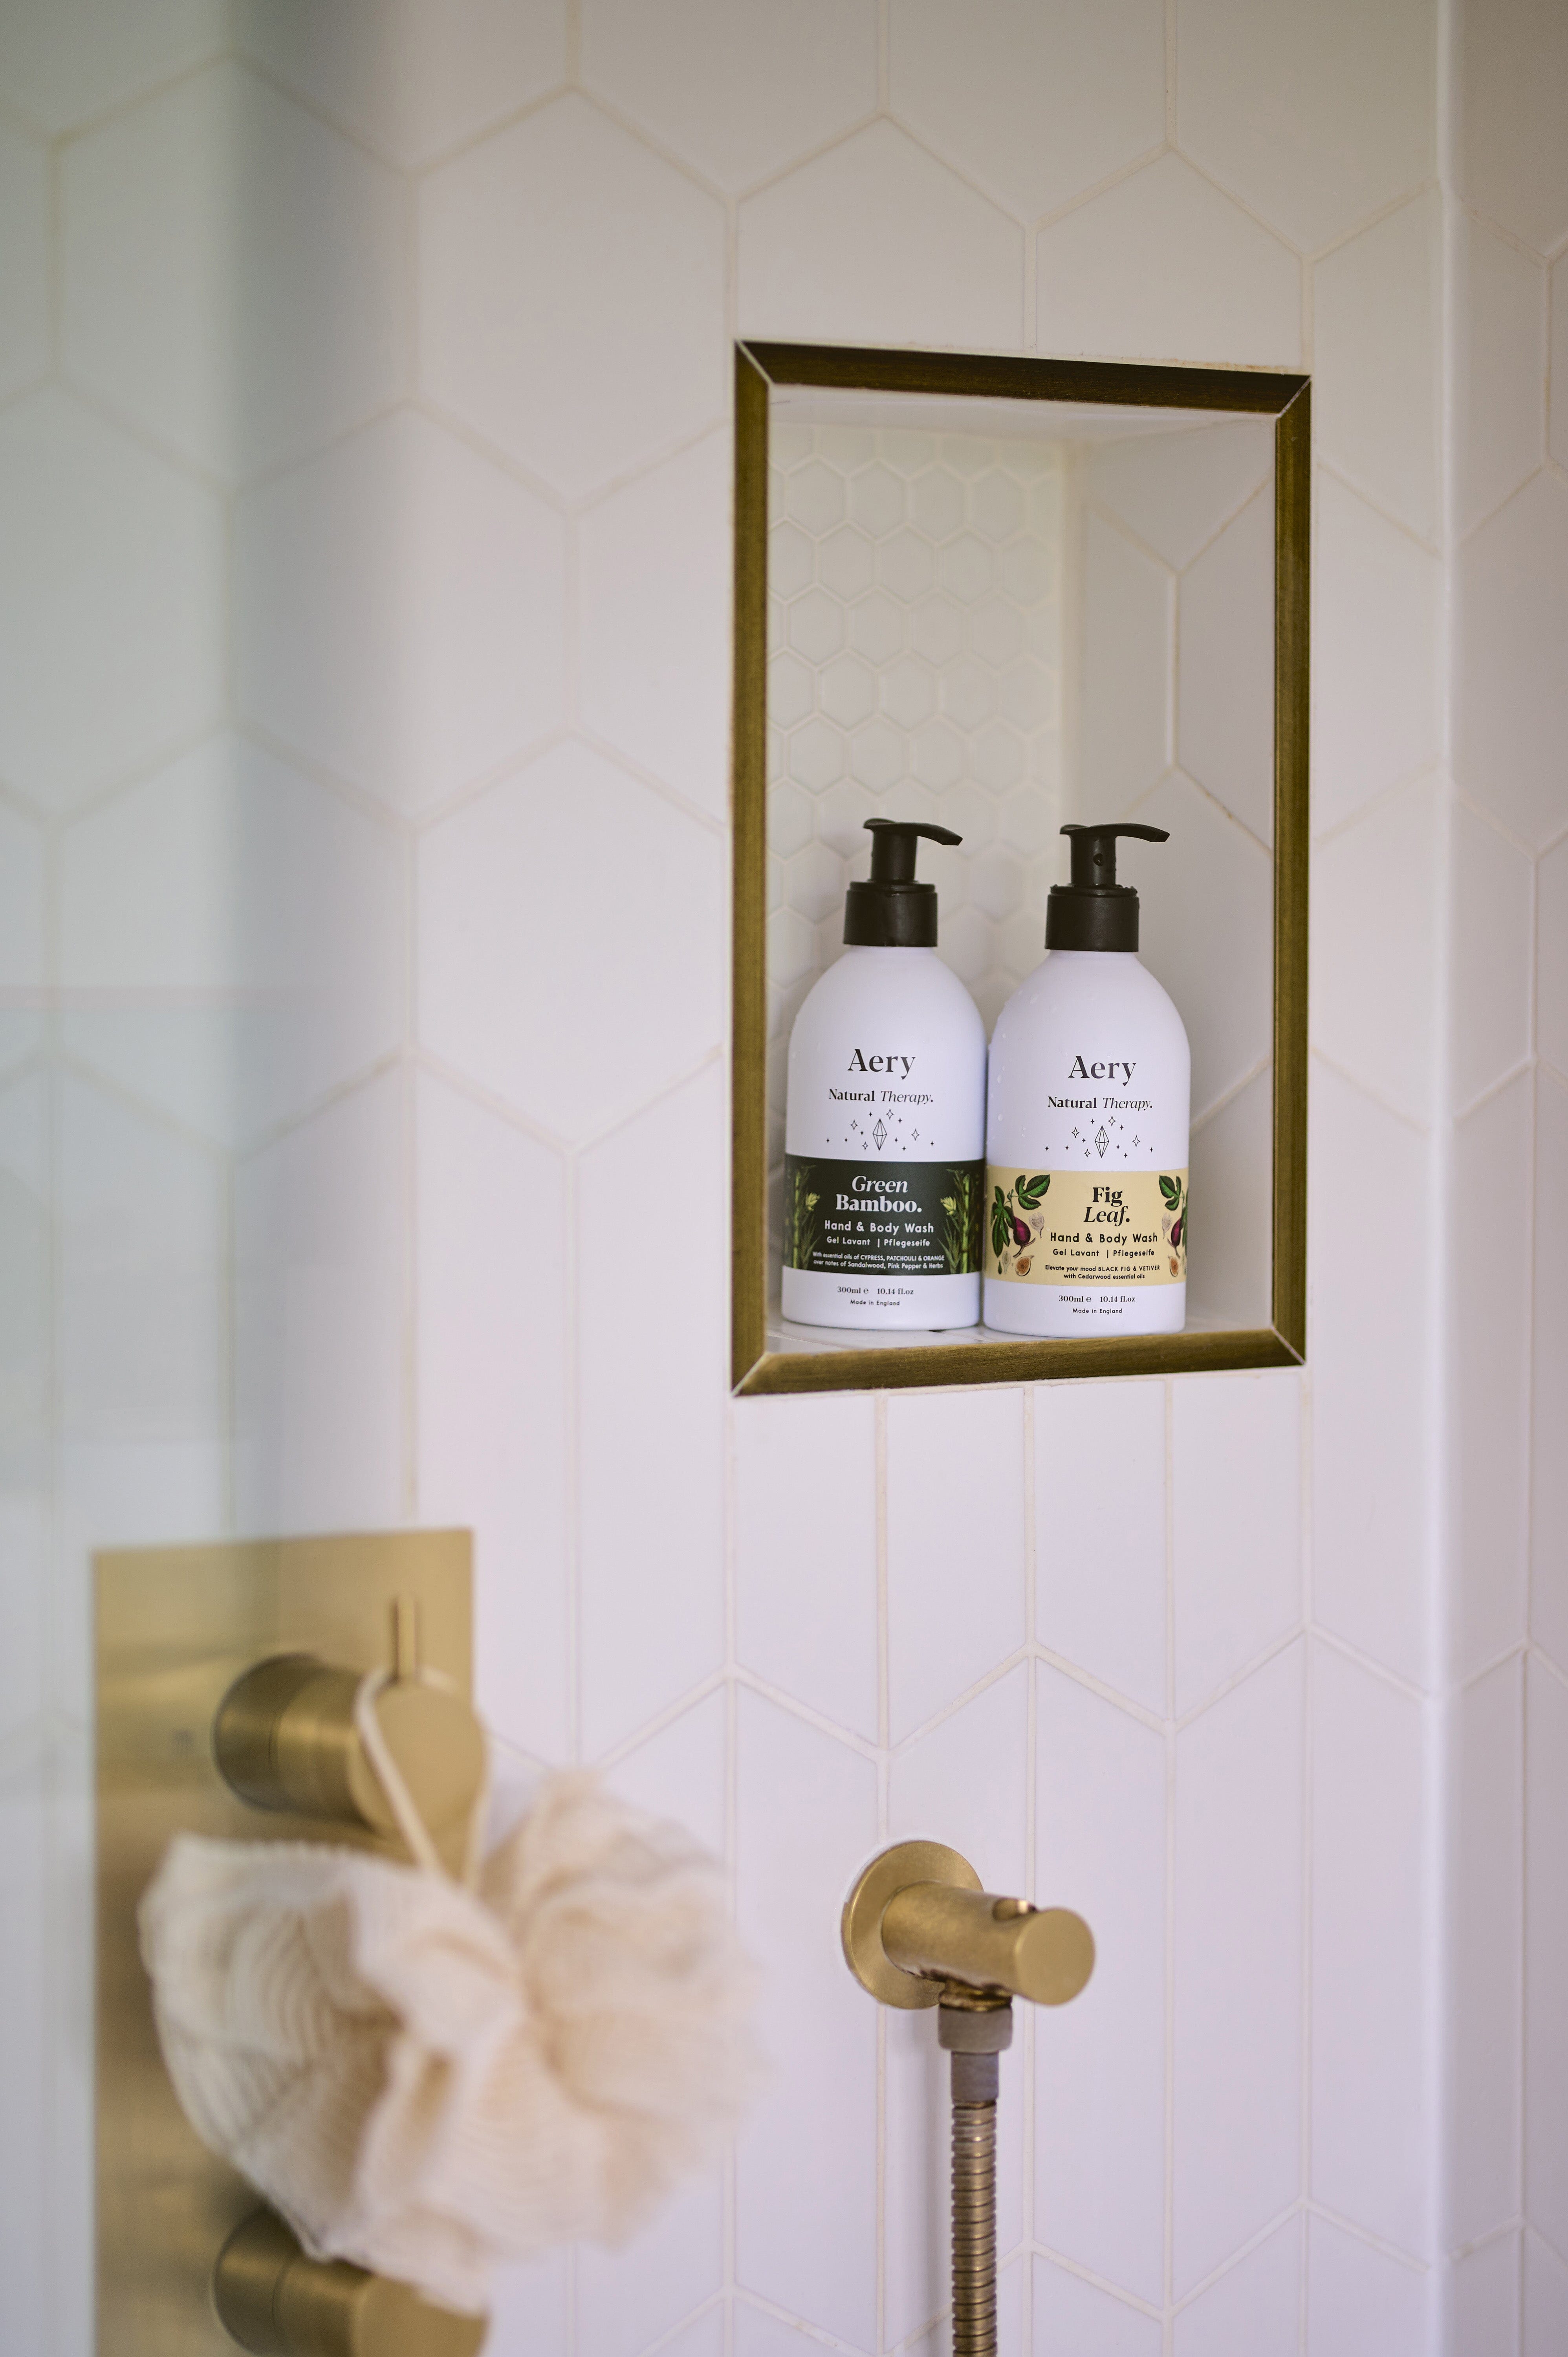 Green Bamboo hand wash By Aery displayed next to Fig Leaf hand wash by Aery on shelf in shower 